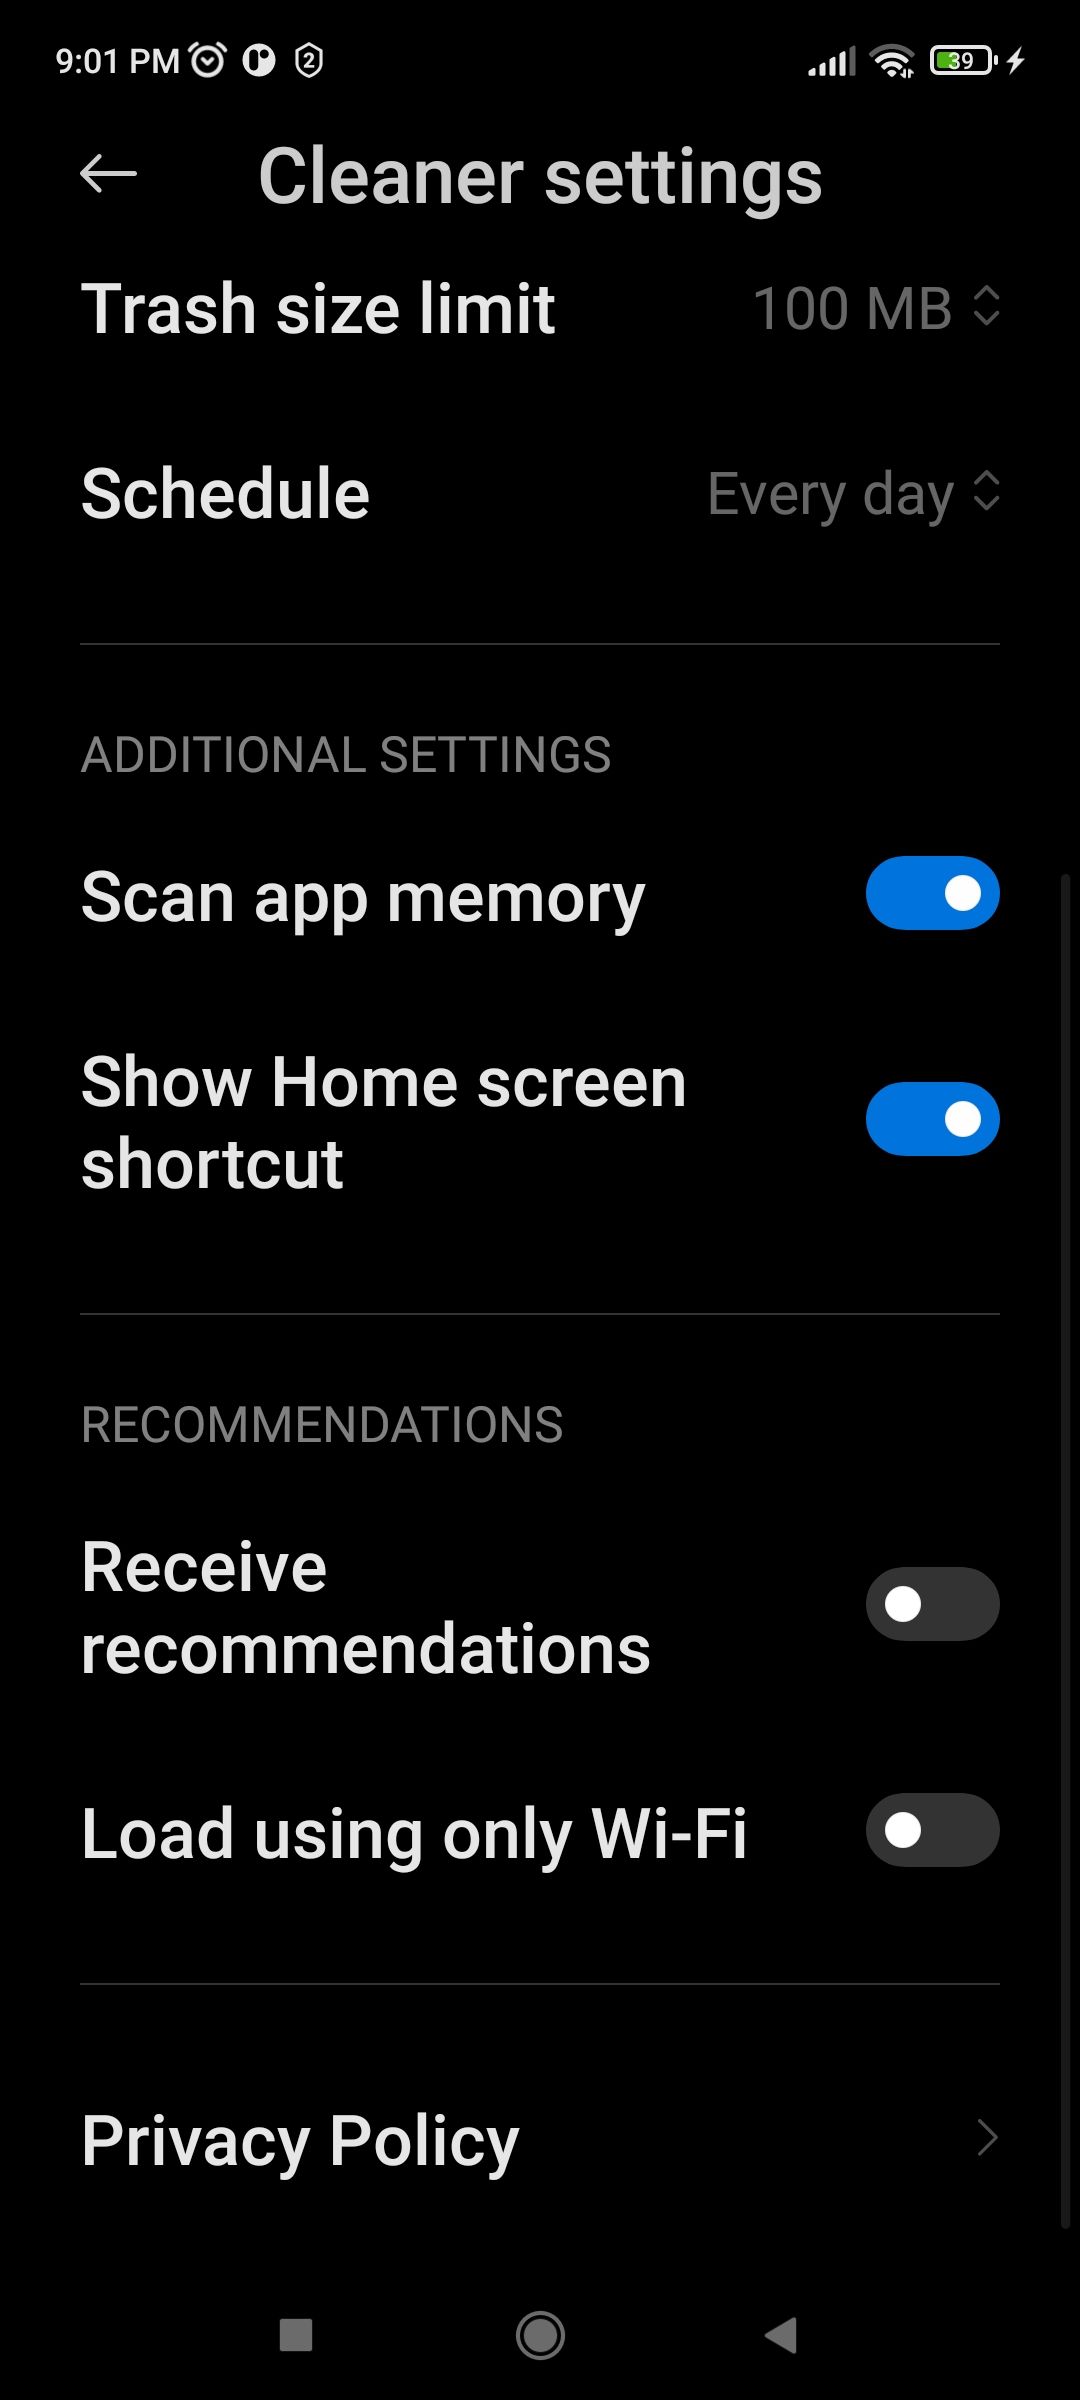 Receive Recommendations turned off in Cleaner Settings